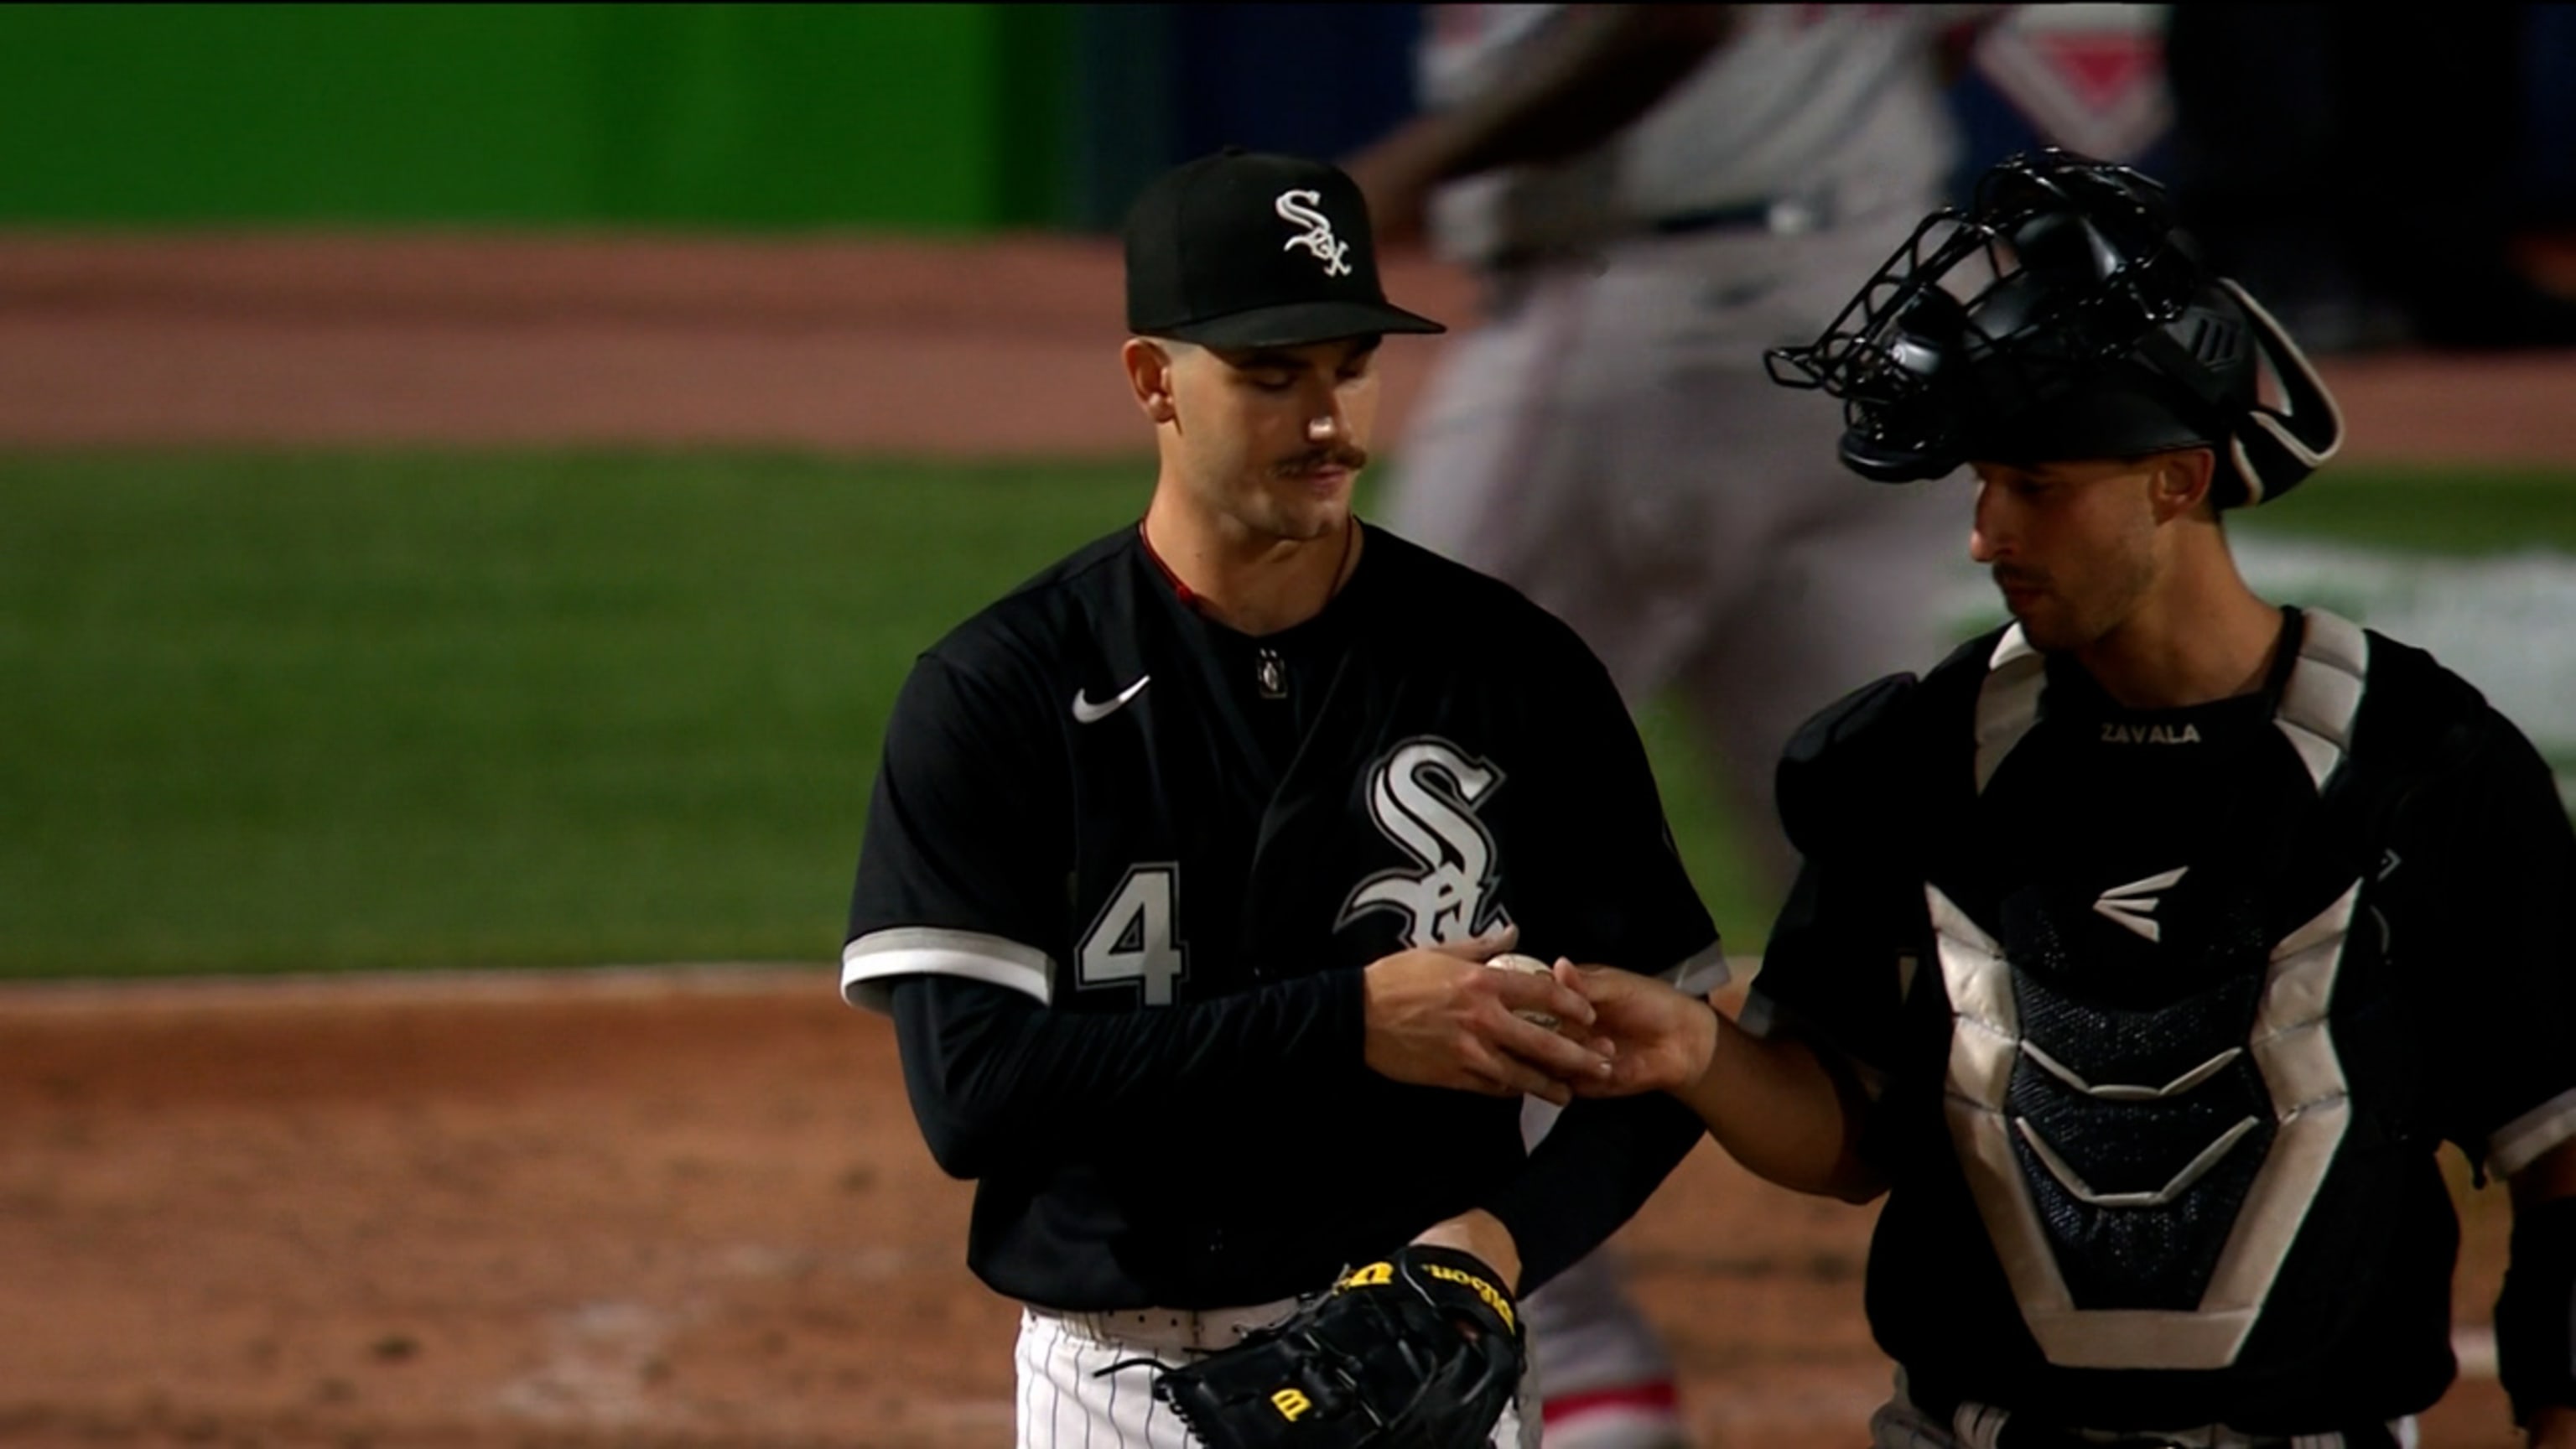 Cease takes no-hitter into 9th, White Sox rout Twins 13-0